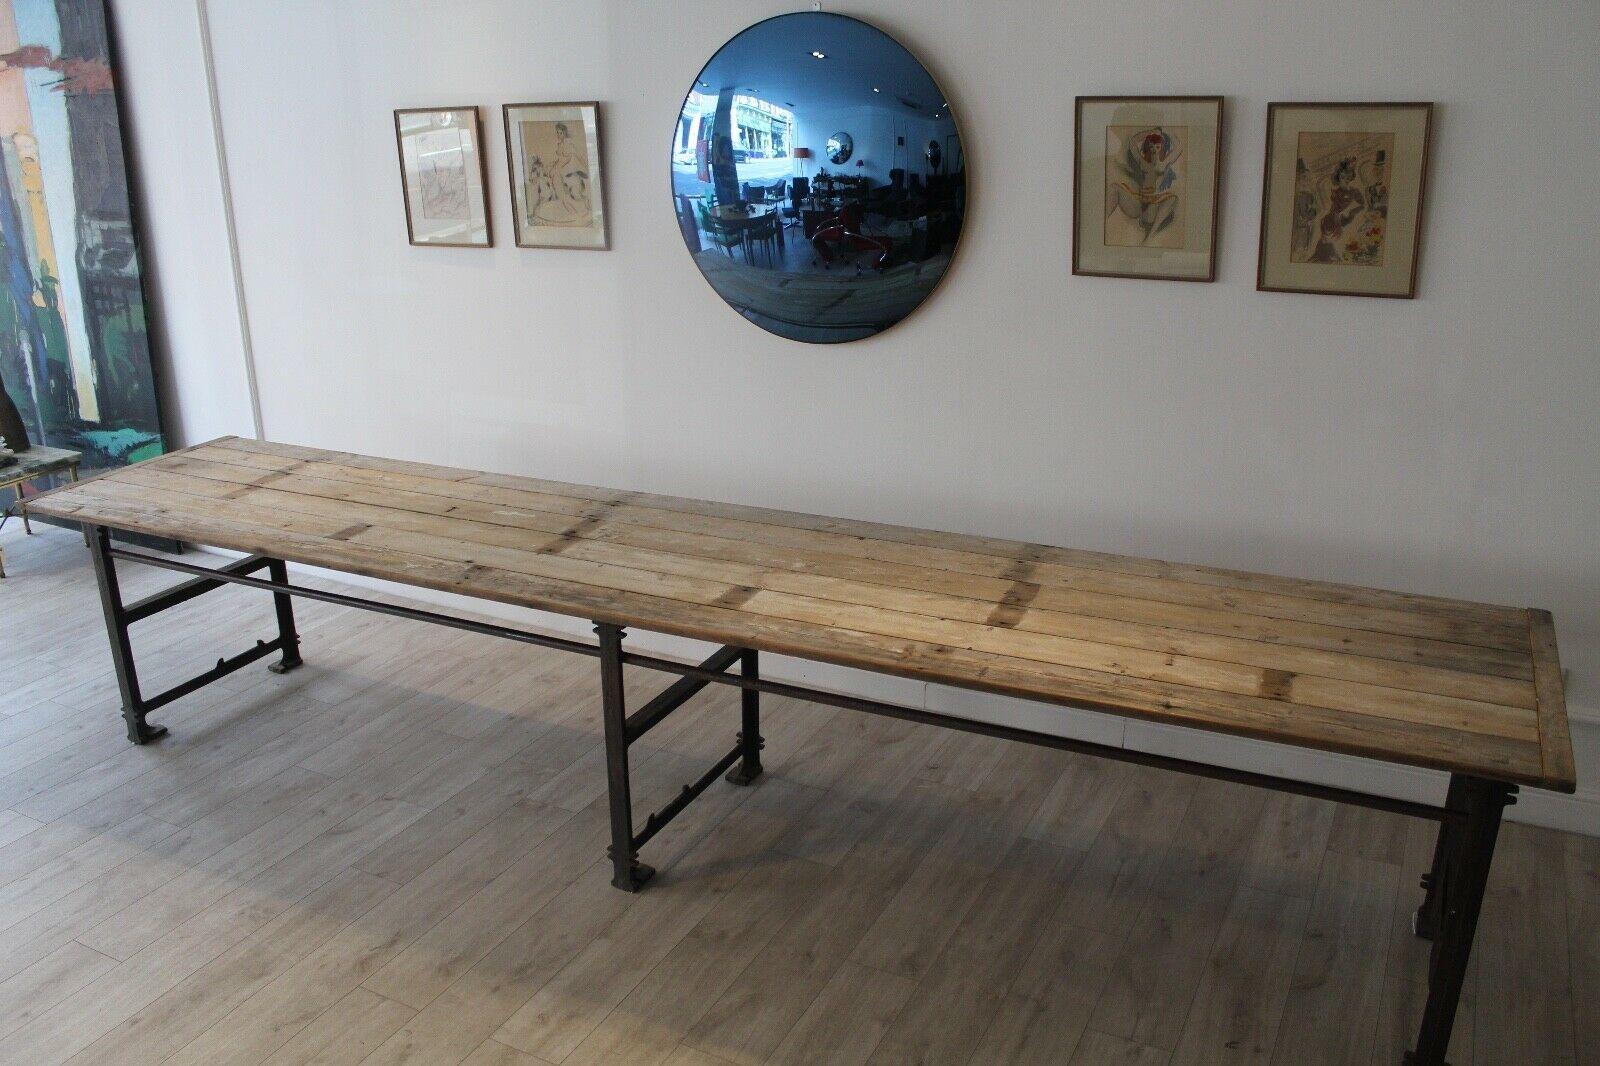 This is a rare, one off handmade extra long dining table.

The tabletop has been made from reclaimed wood with a rustic and scrub top finish. The base is made from reclaimed steel which gives an Industrial and stylish style to the table.